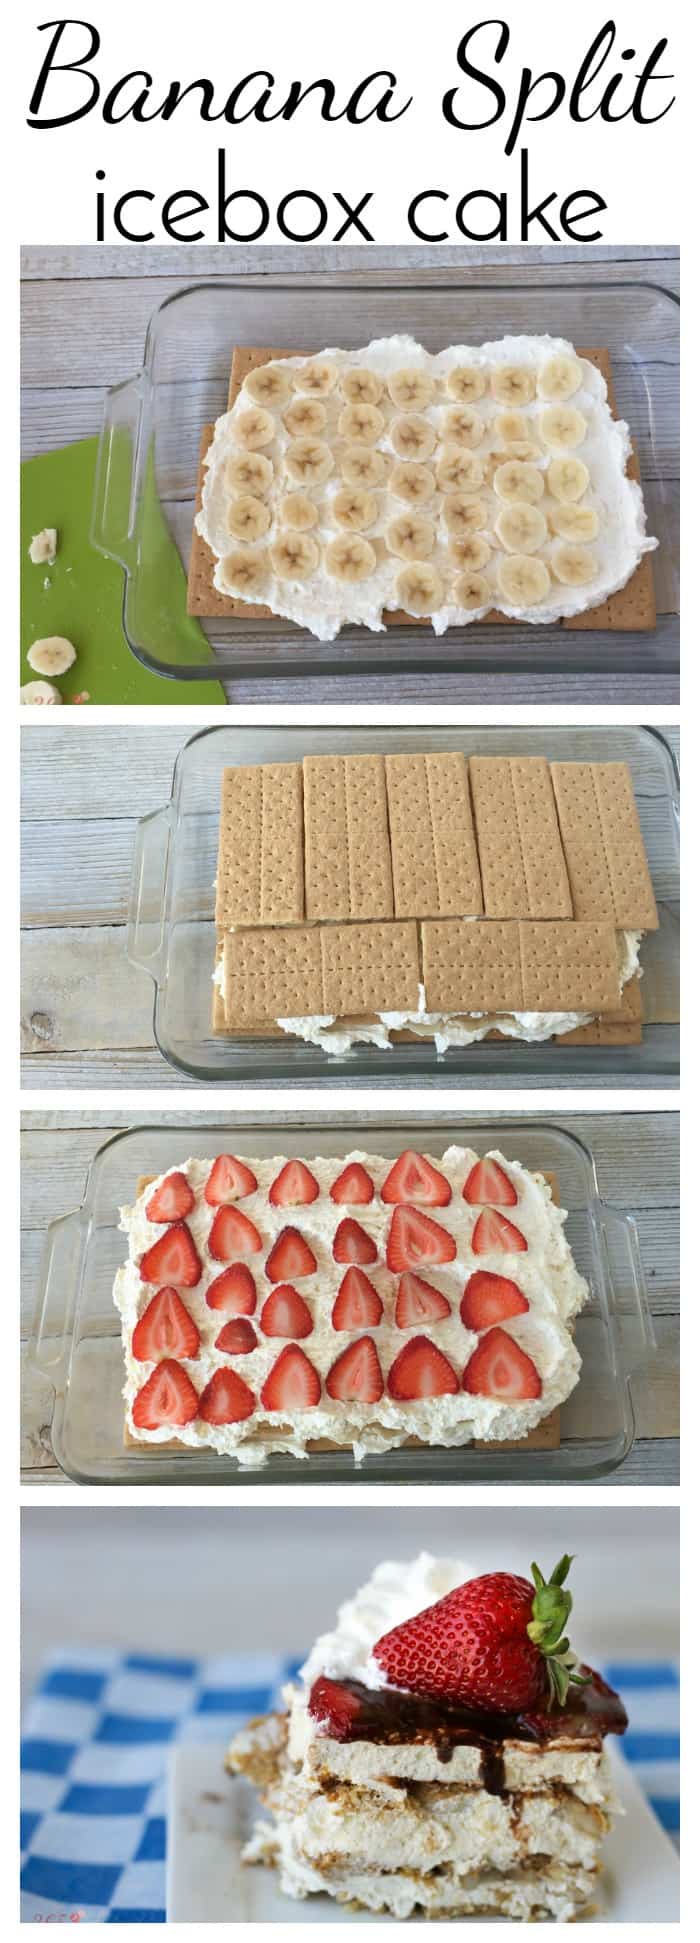 The classic banana split flavors of strawberry, banana and pineapple take center stage in this easy no bake dessert. Banana Split Icebox Cake is perfect for summer BBQ's and picnics! via @nmburk